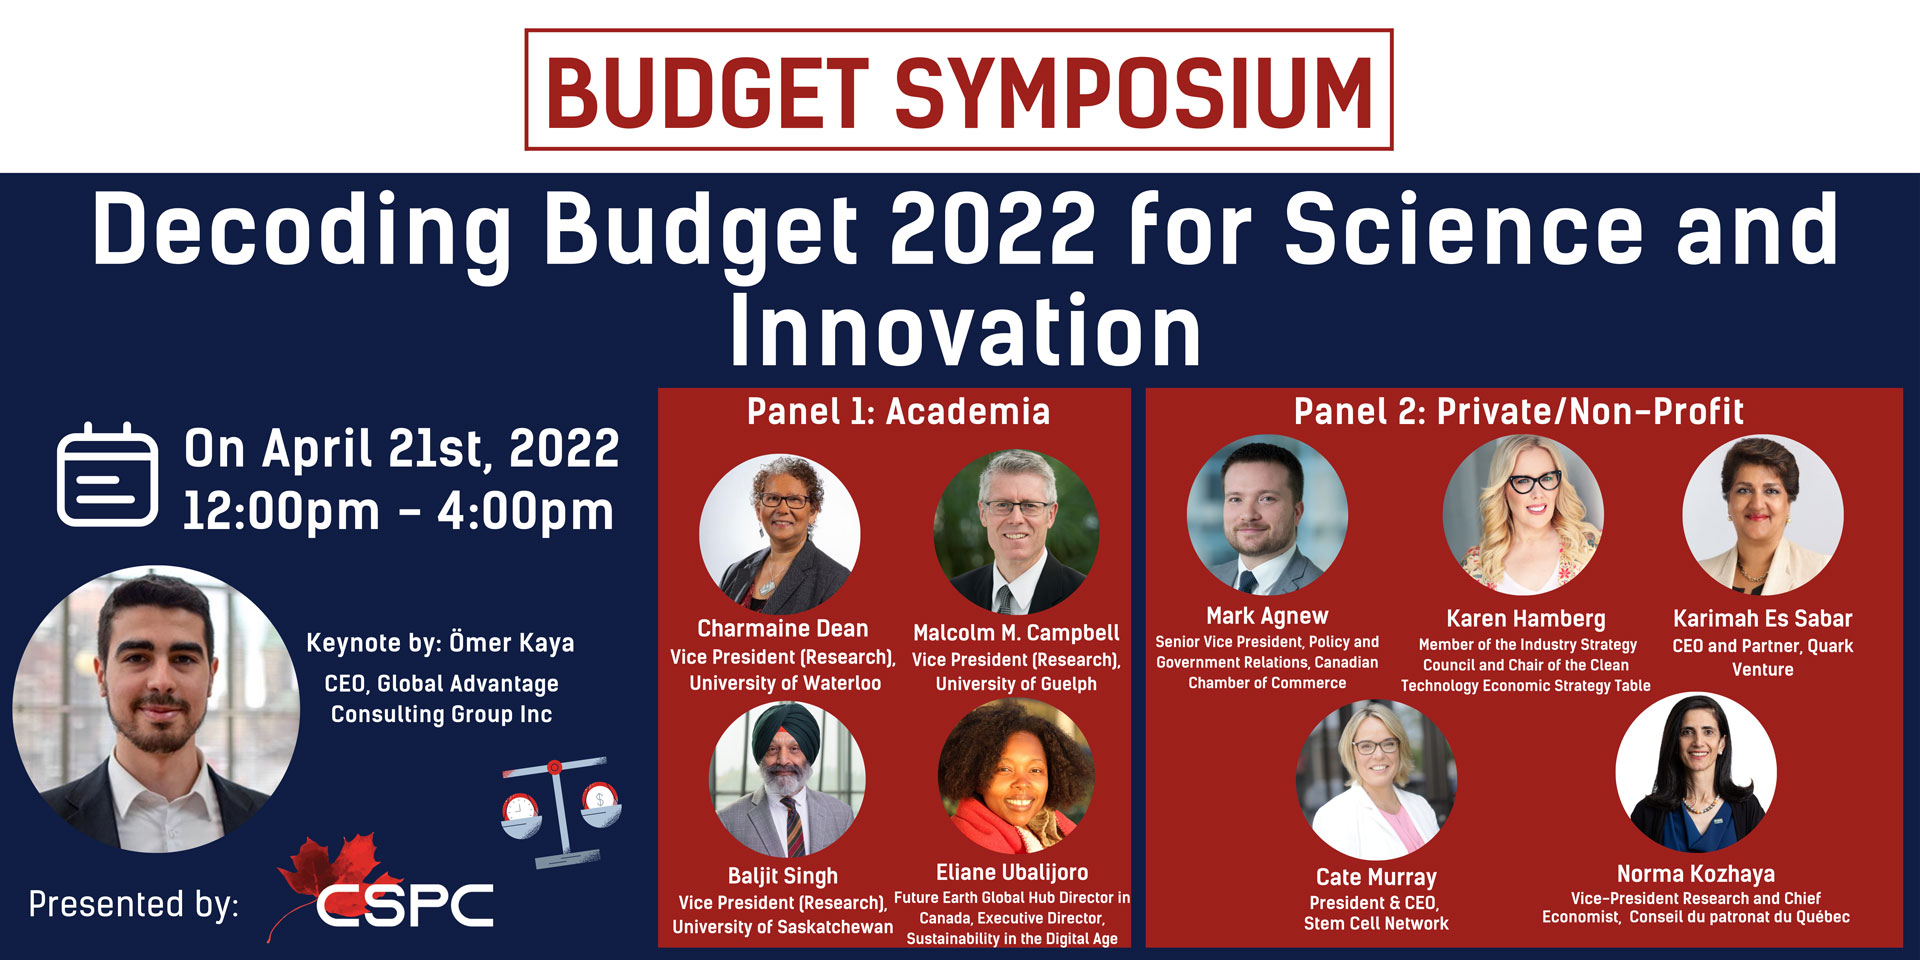 Decoding Budget 2022 for Science and Innovation